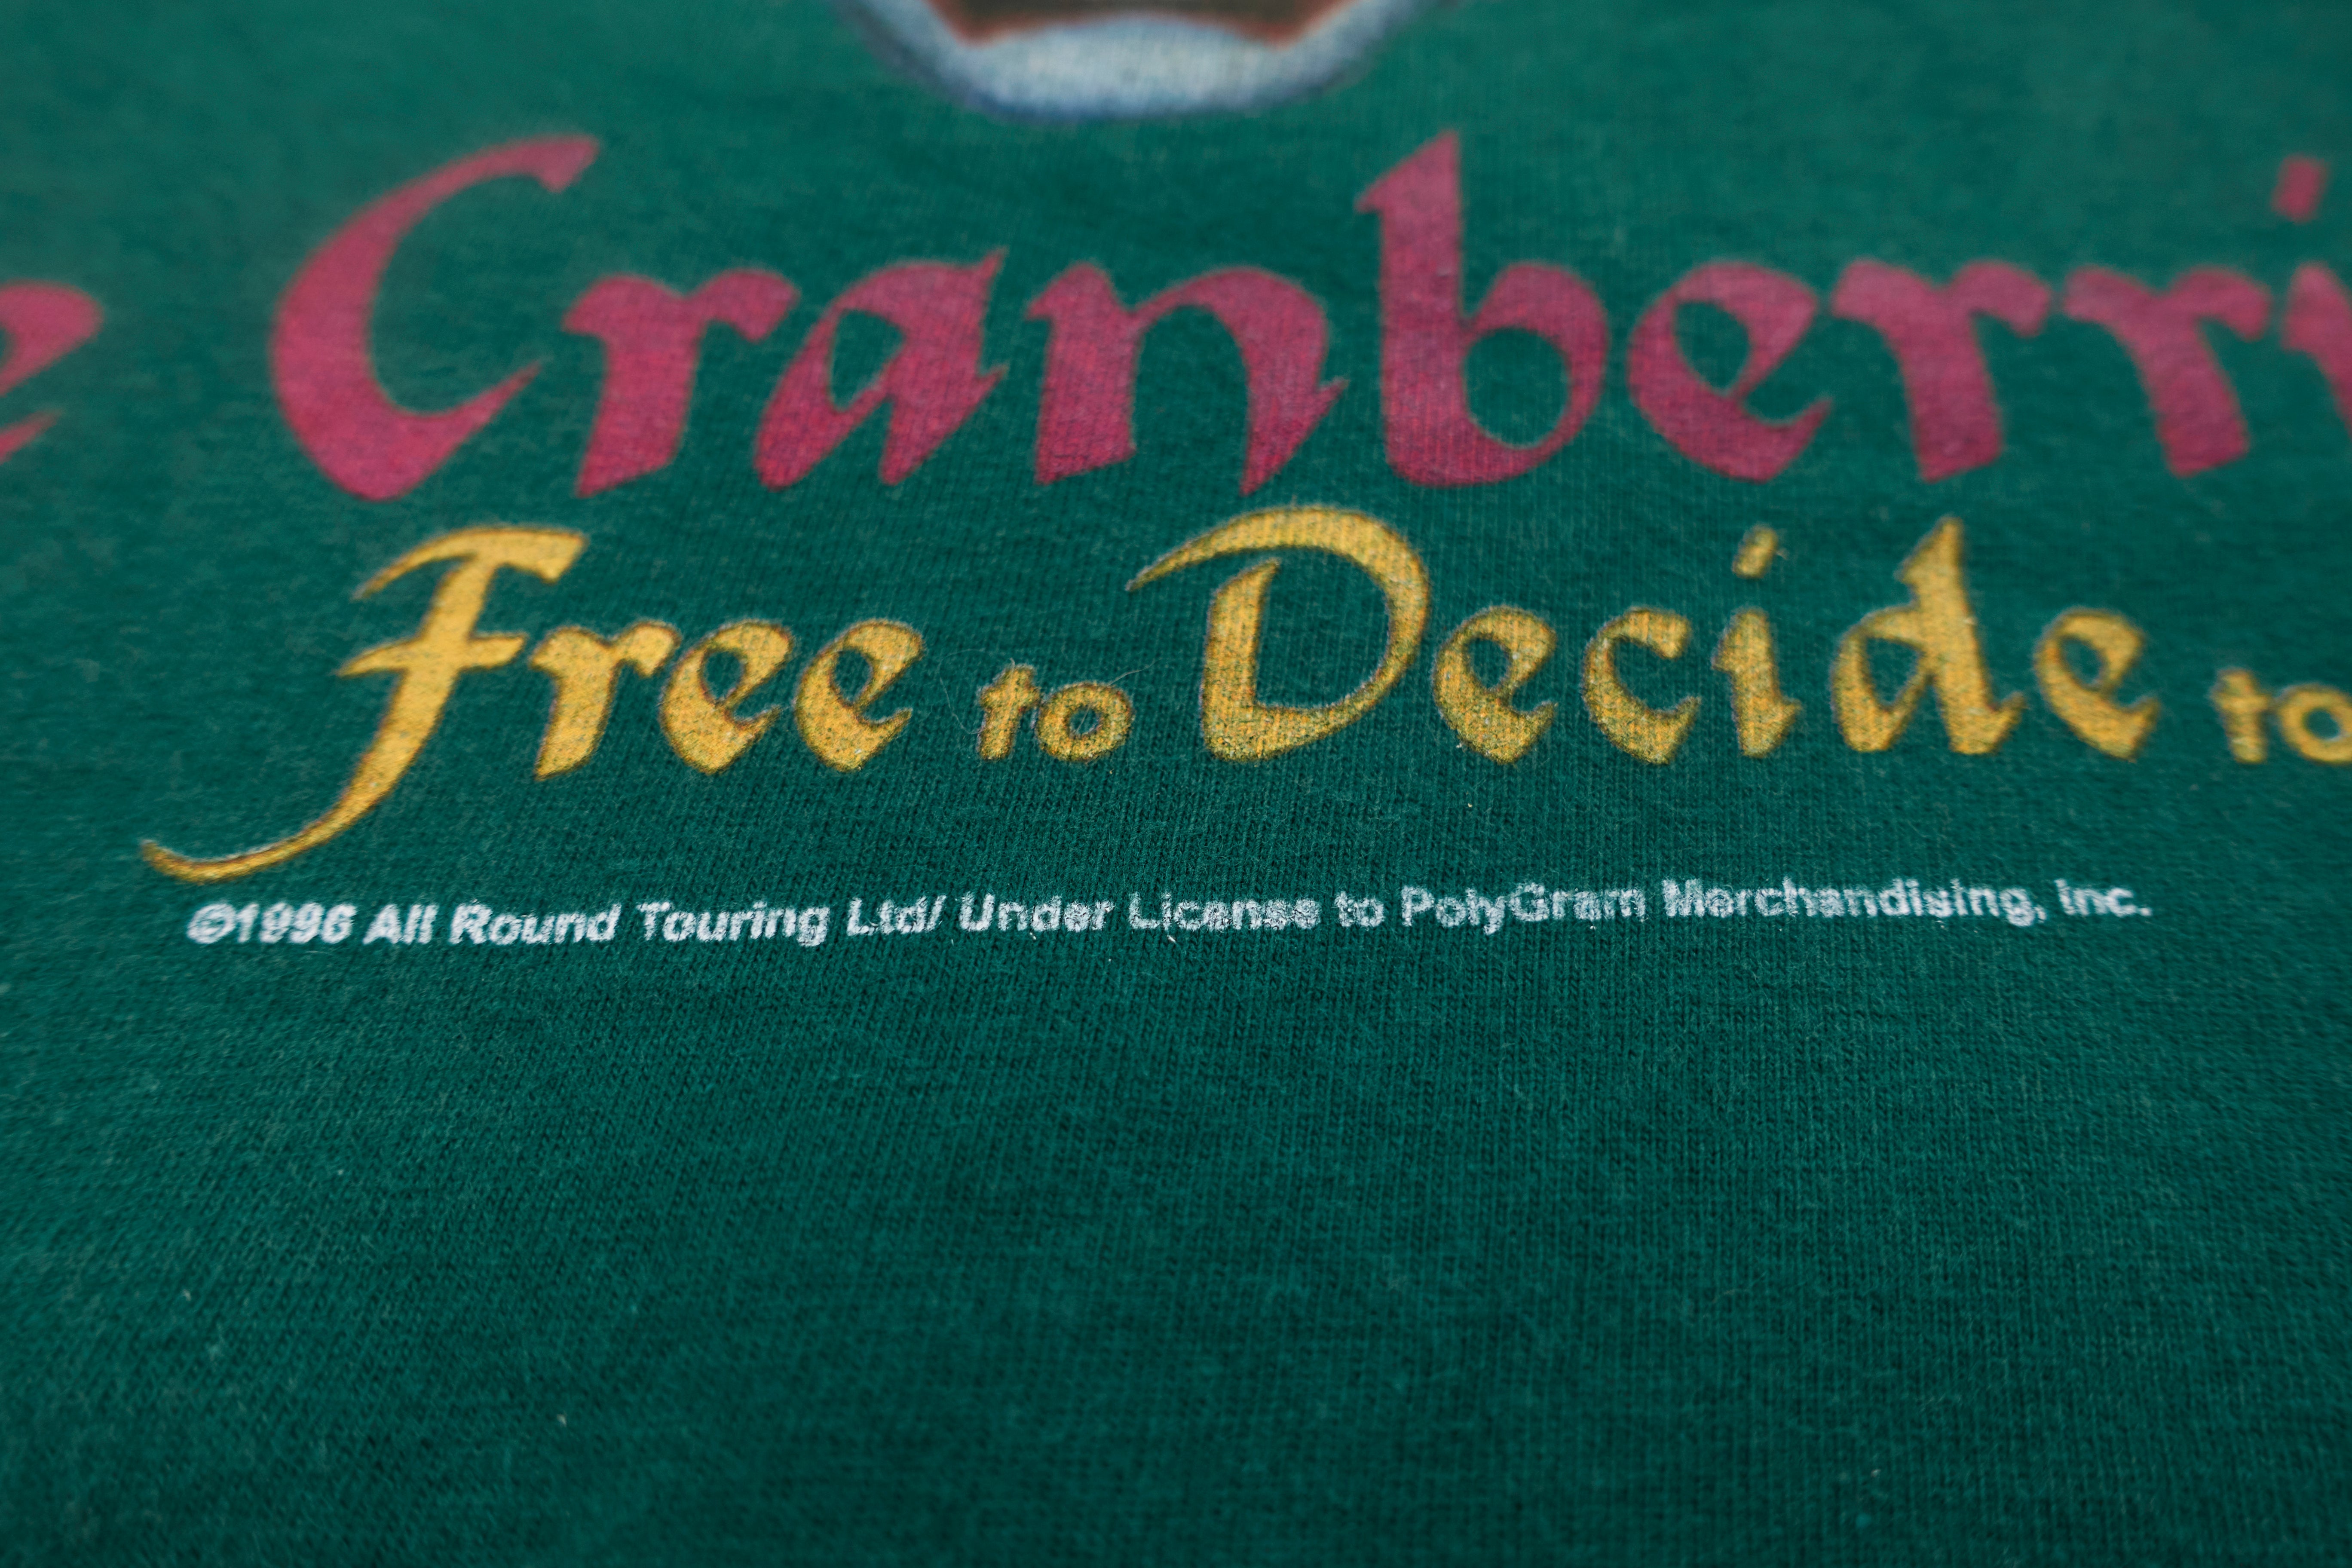 the Cranberries - Free To Decide 1996 North American Tour Shirt Size XL